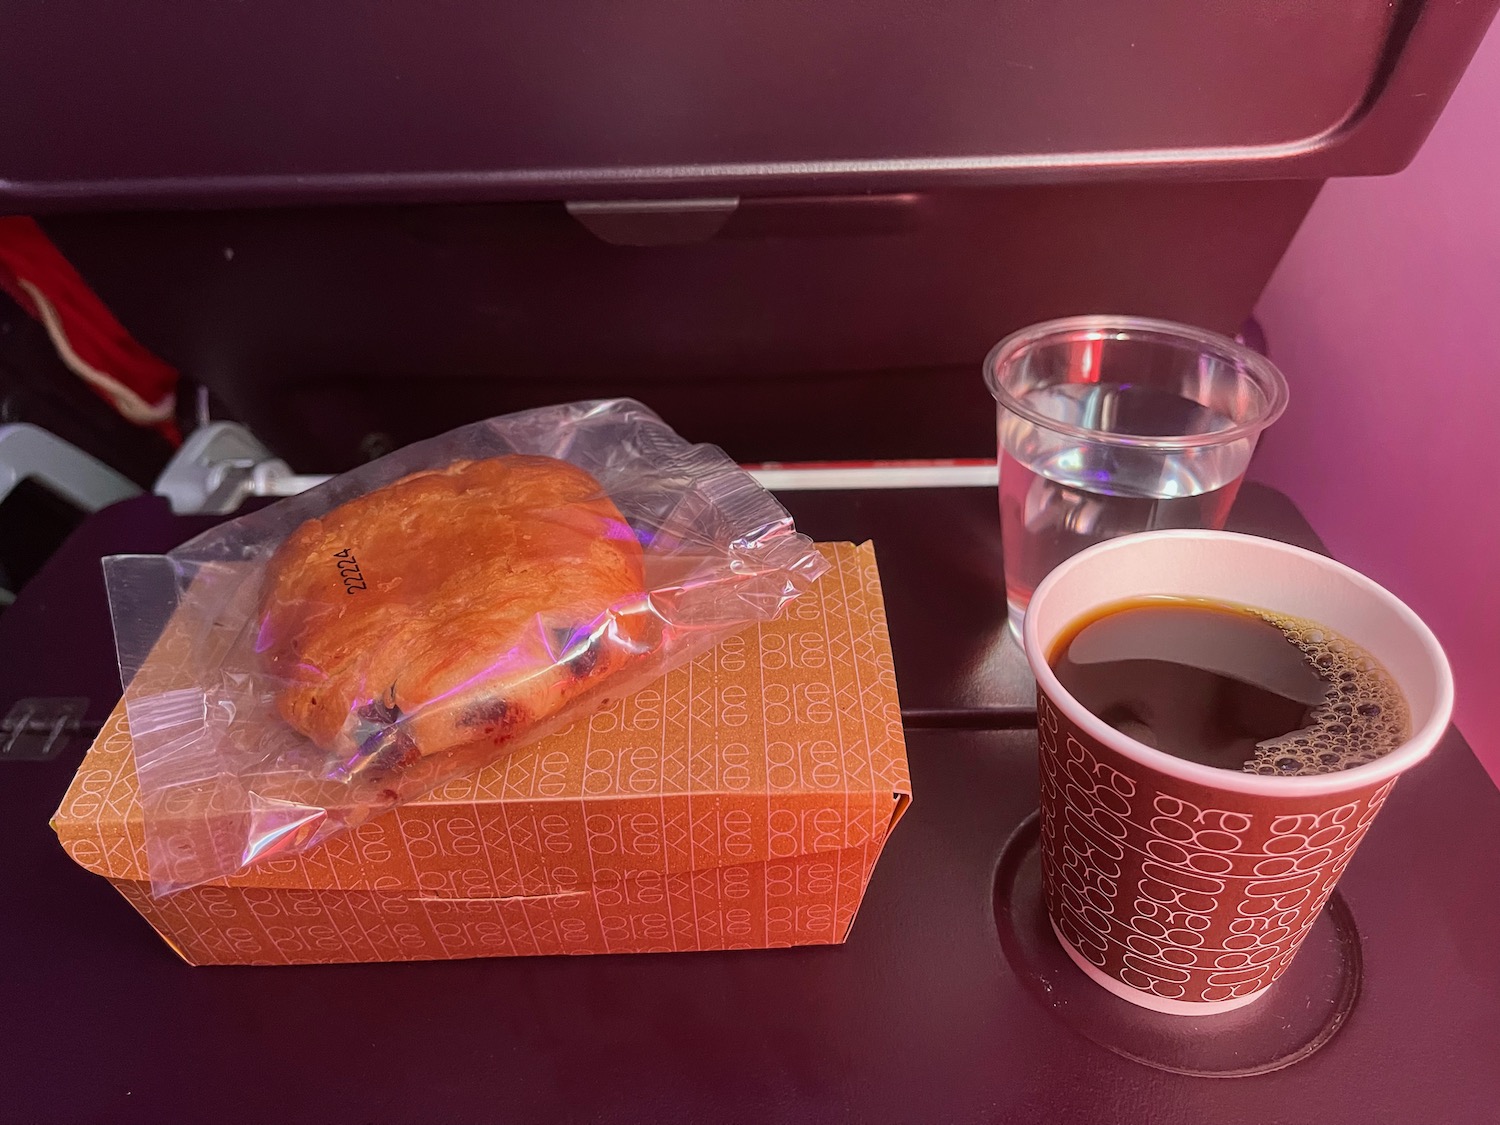 a pastry and a cup of coffee on a tray